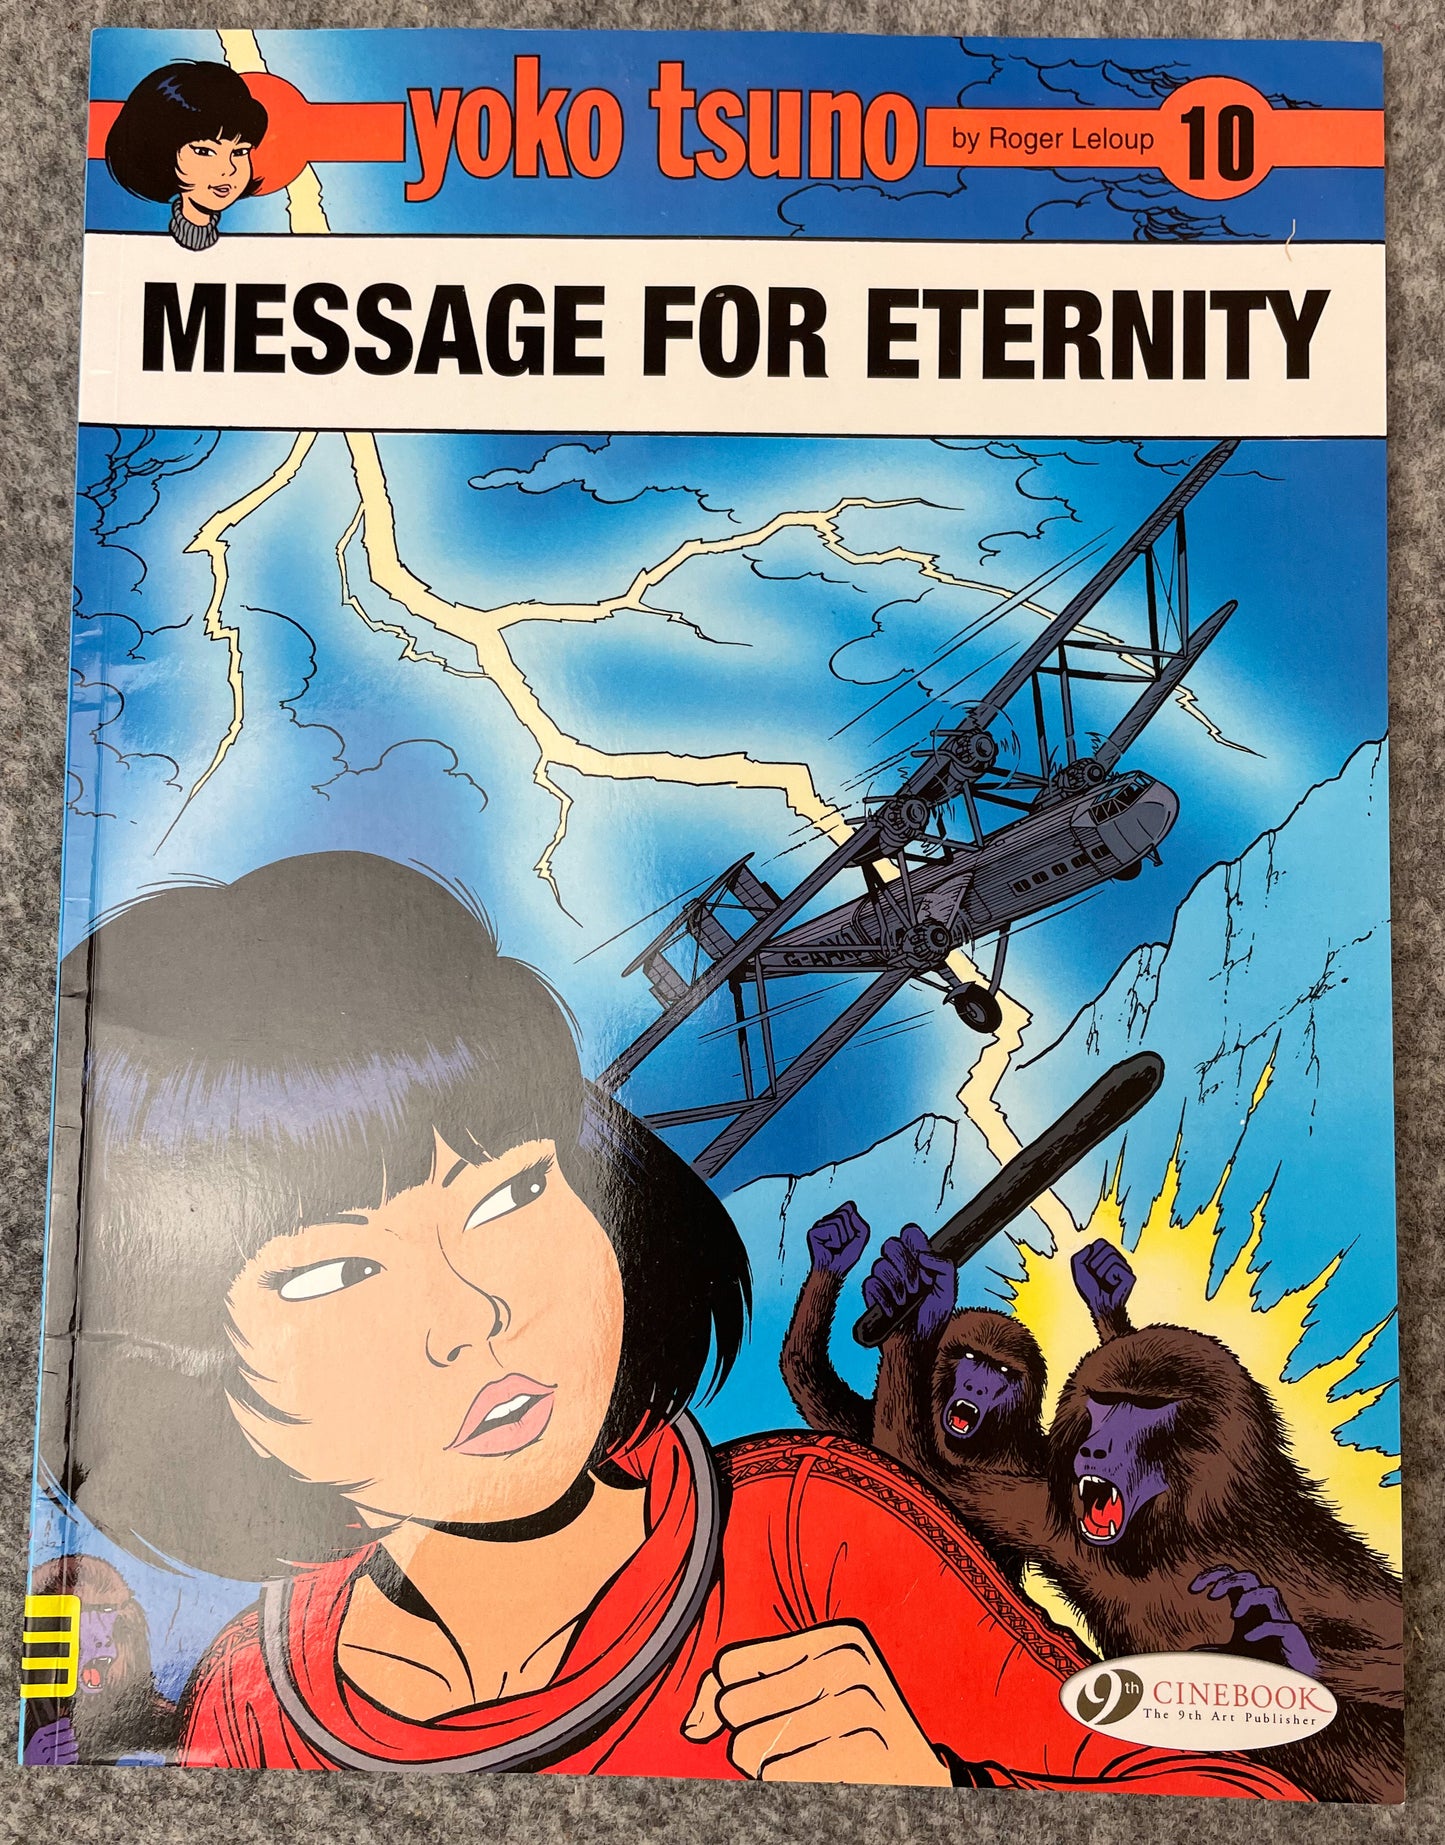 Yoko Tsuno Volume 10 - Message For Eternity Cinebook Paperback Comic Book by R. Leloup